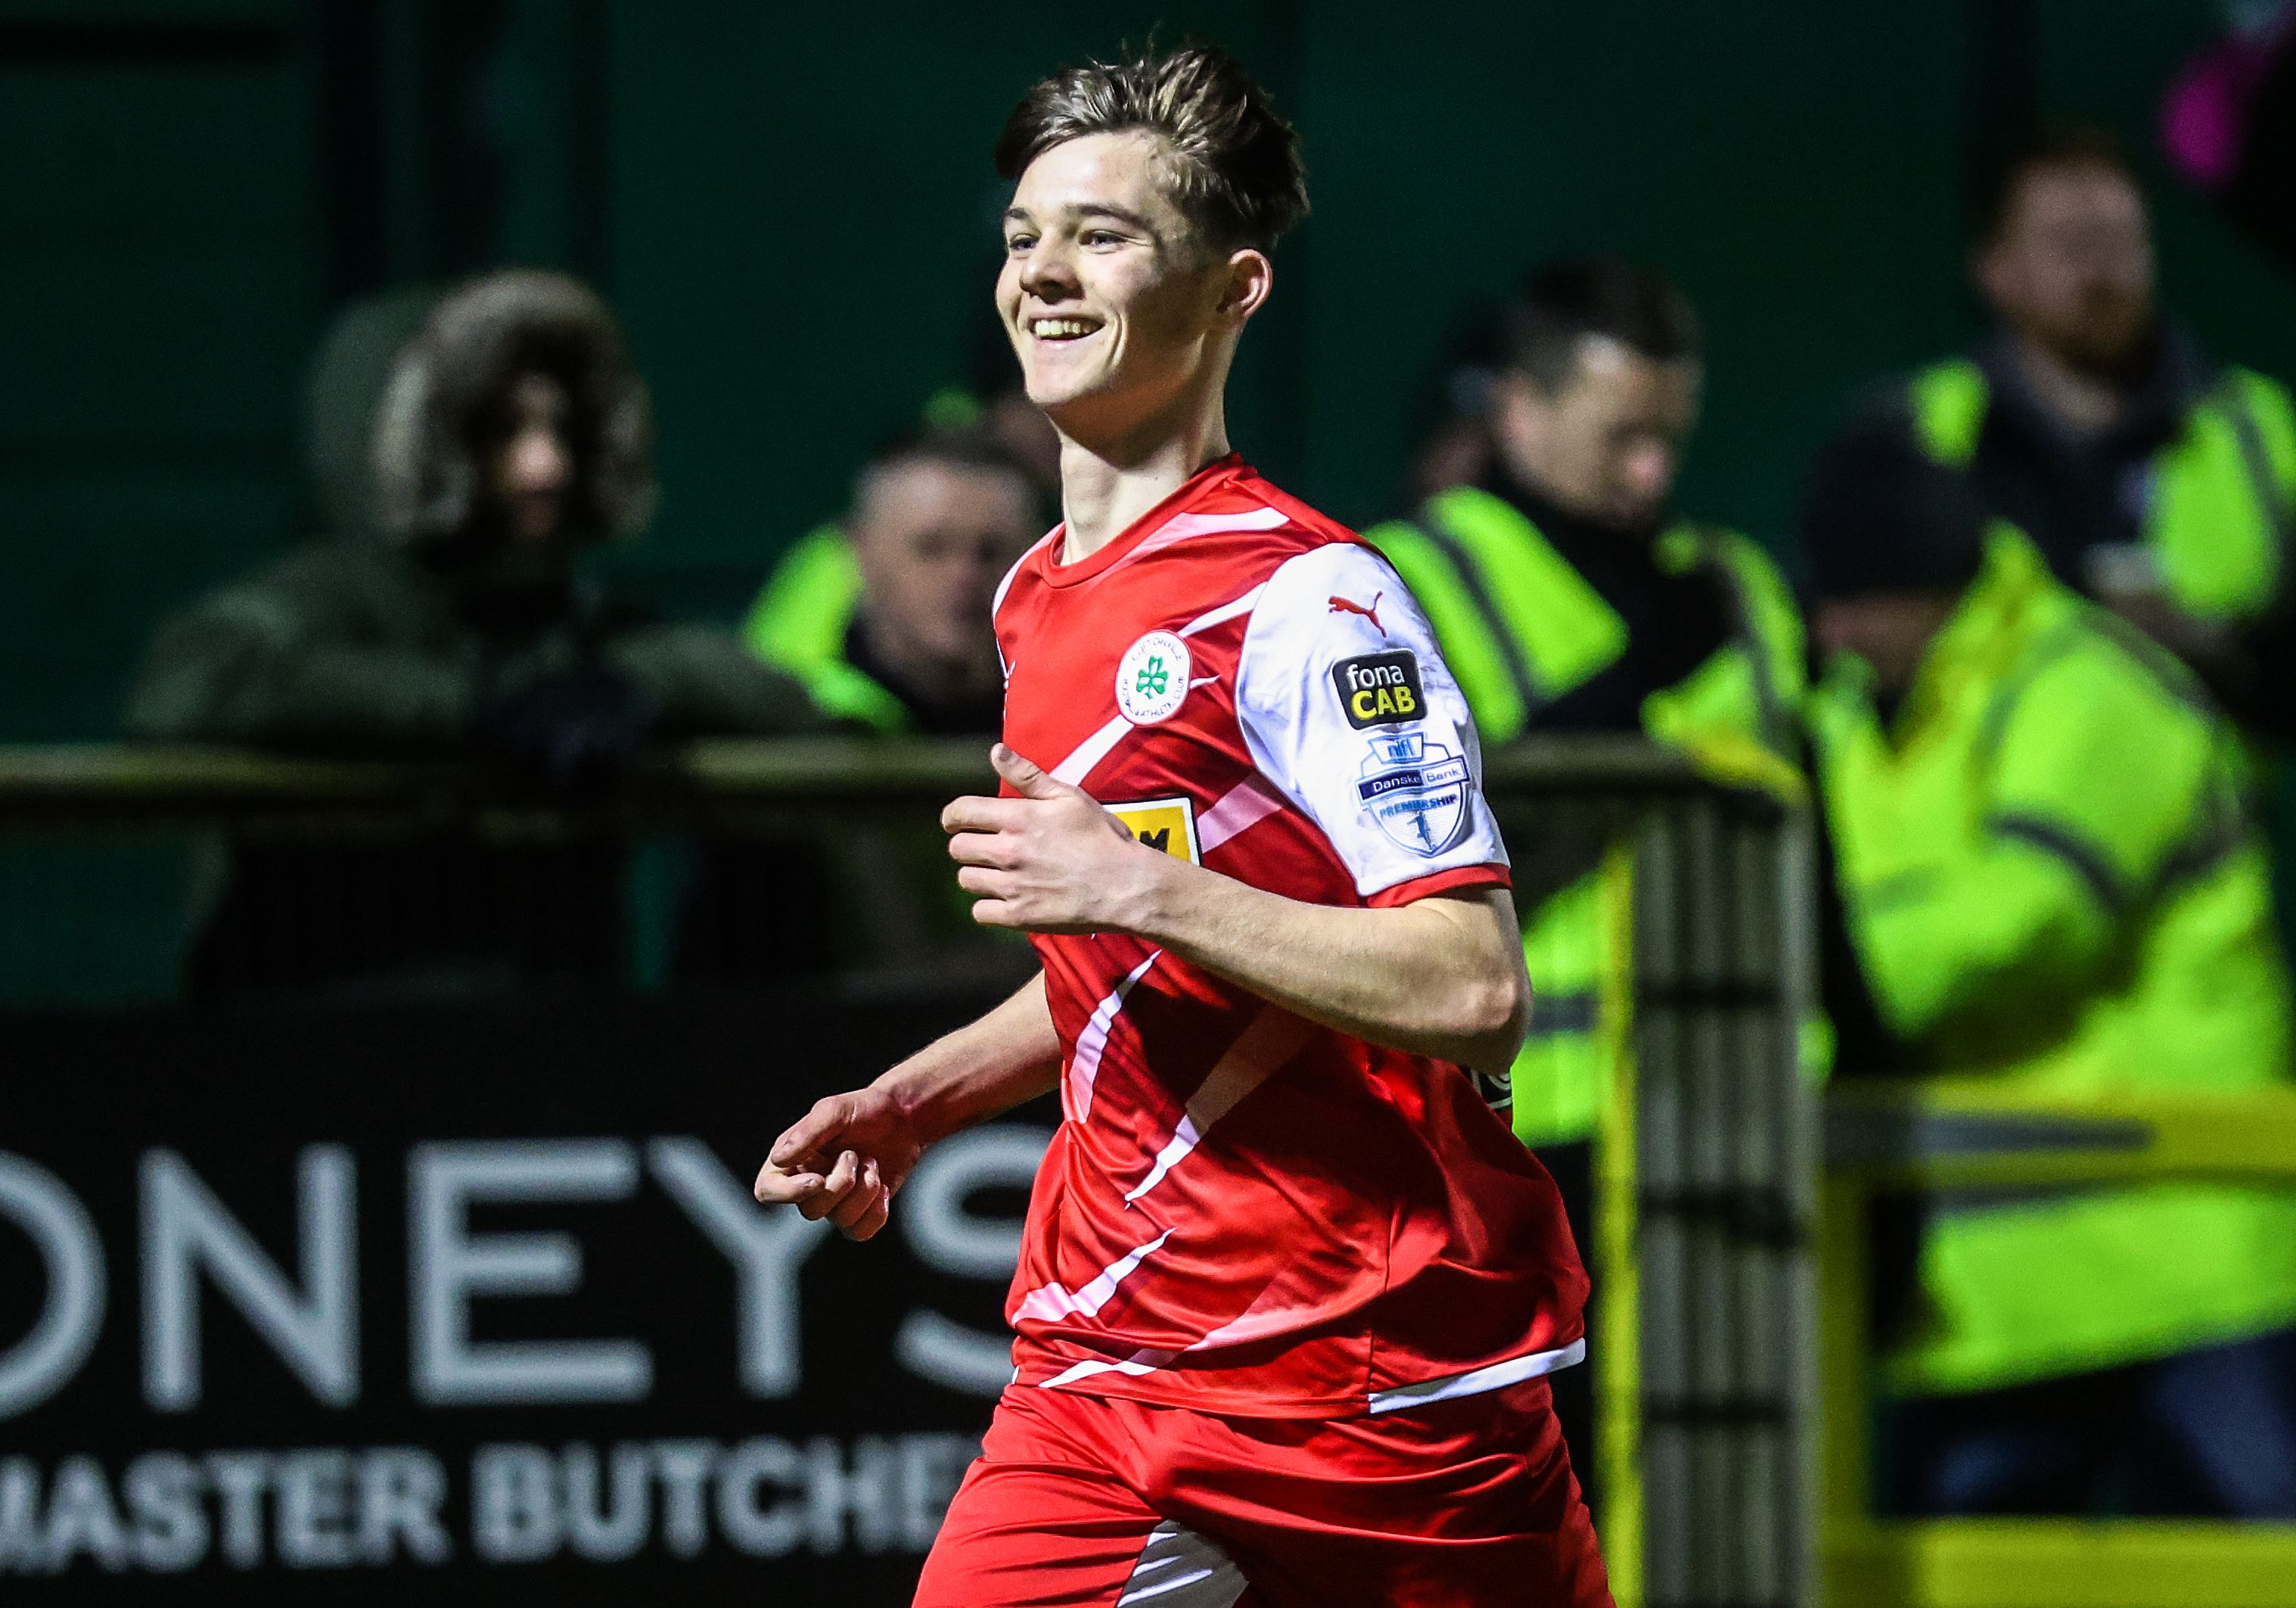 Speculation surrounding the international status of 17-year-old Sean Moore has drawn criticism from Cliftonville manager Paddy McLaughlin who blasted the pressure put on the teenager